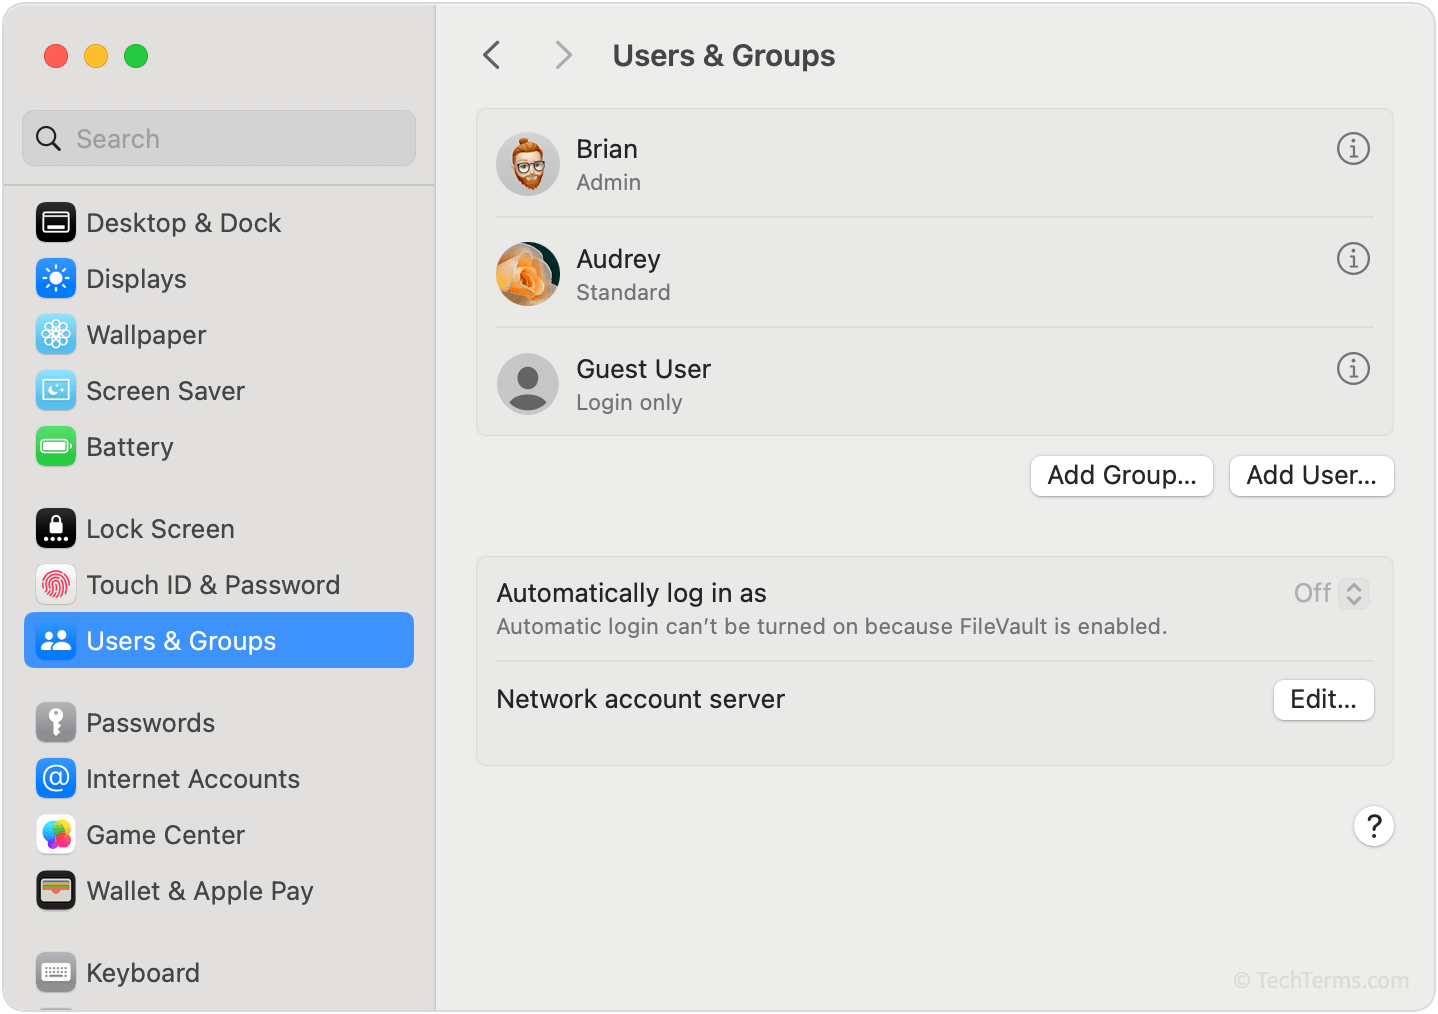 Administrator, standard, and guest user accounts in the macOS System Settings app